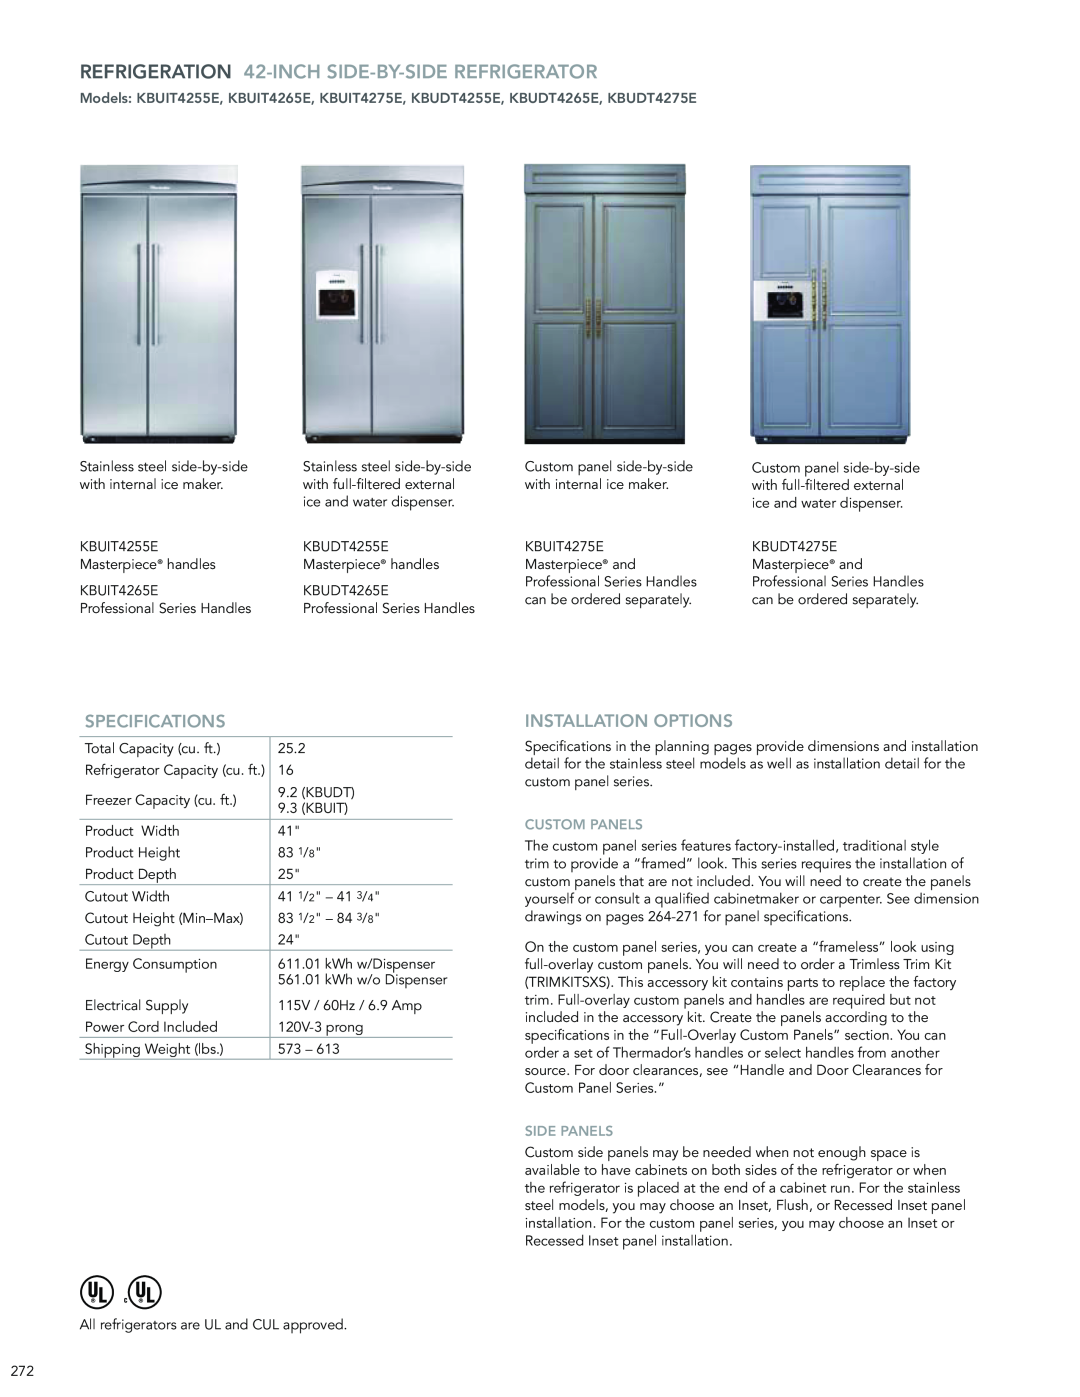 Thermador KBUIT4255E REFRIGERATION 42-INCH SIDE-BY-SIDEREFRIGERATOR, Specifications, Installation Options, Custom Panels 